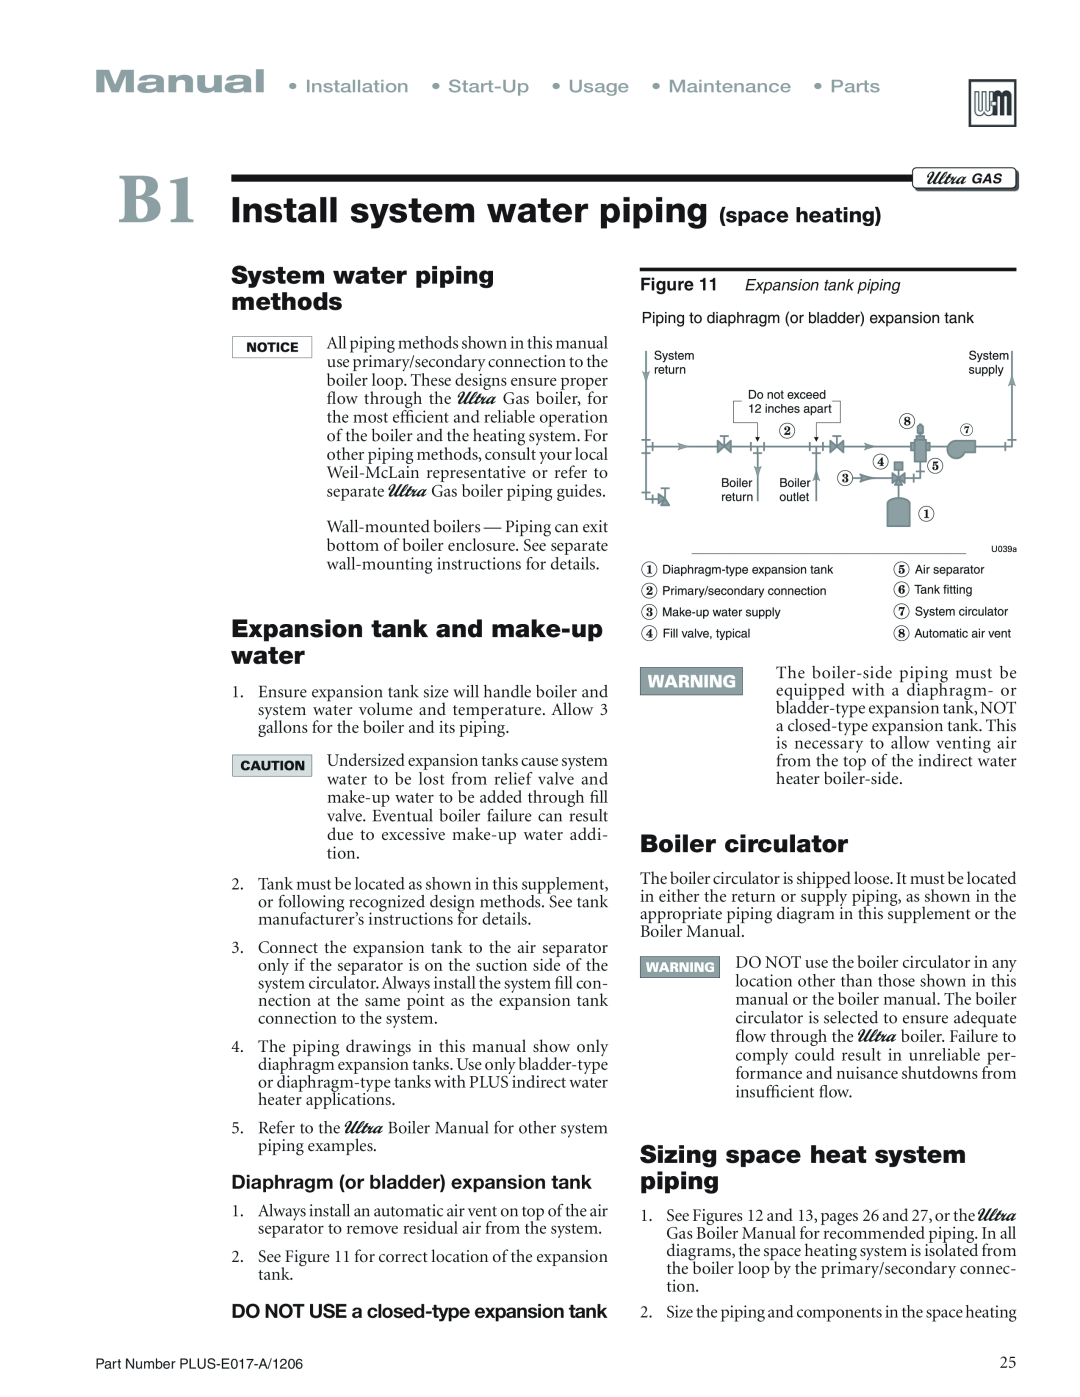 Weil-McLain PLUS-E017-A/1206 manual System water piping methods, Expansion tank and make-upwater, Boiler circulator 